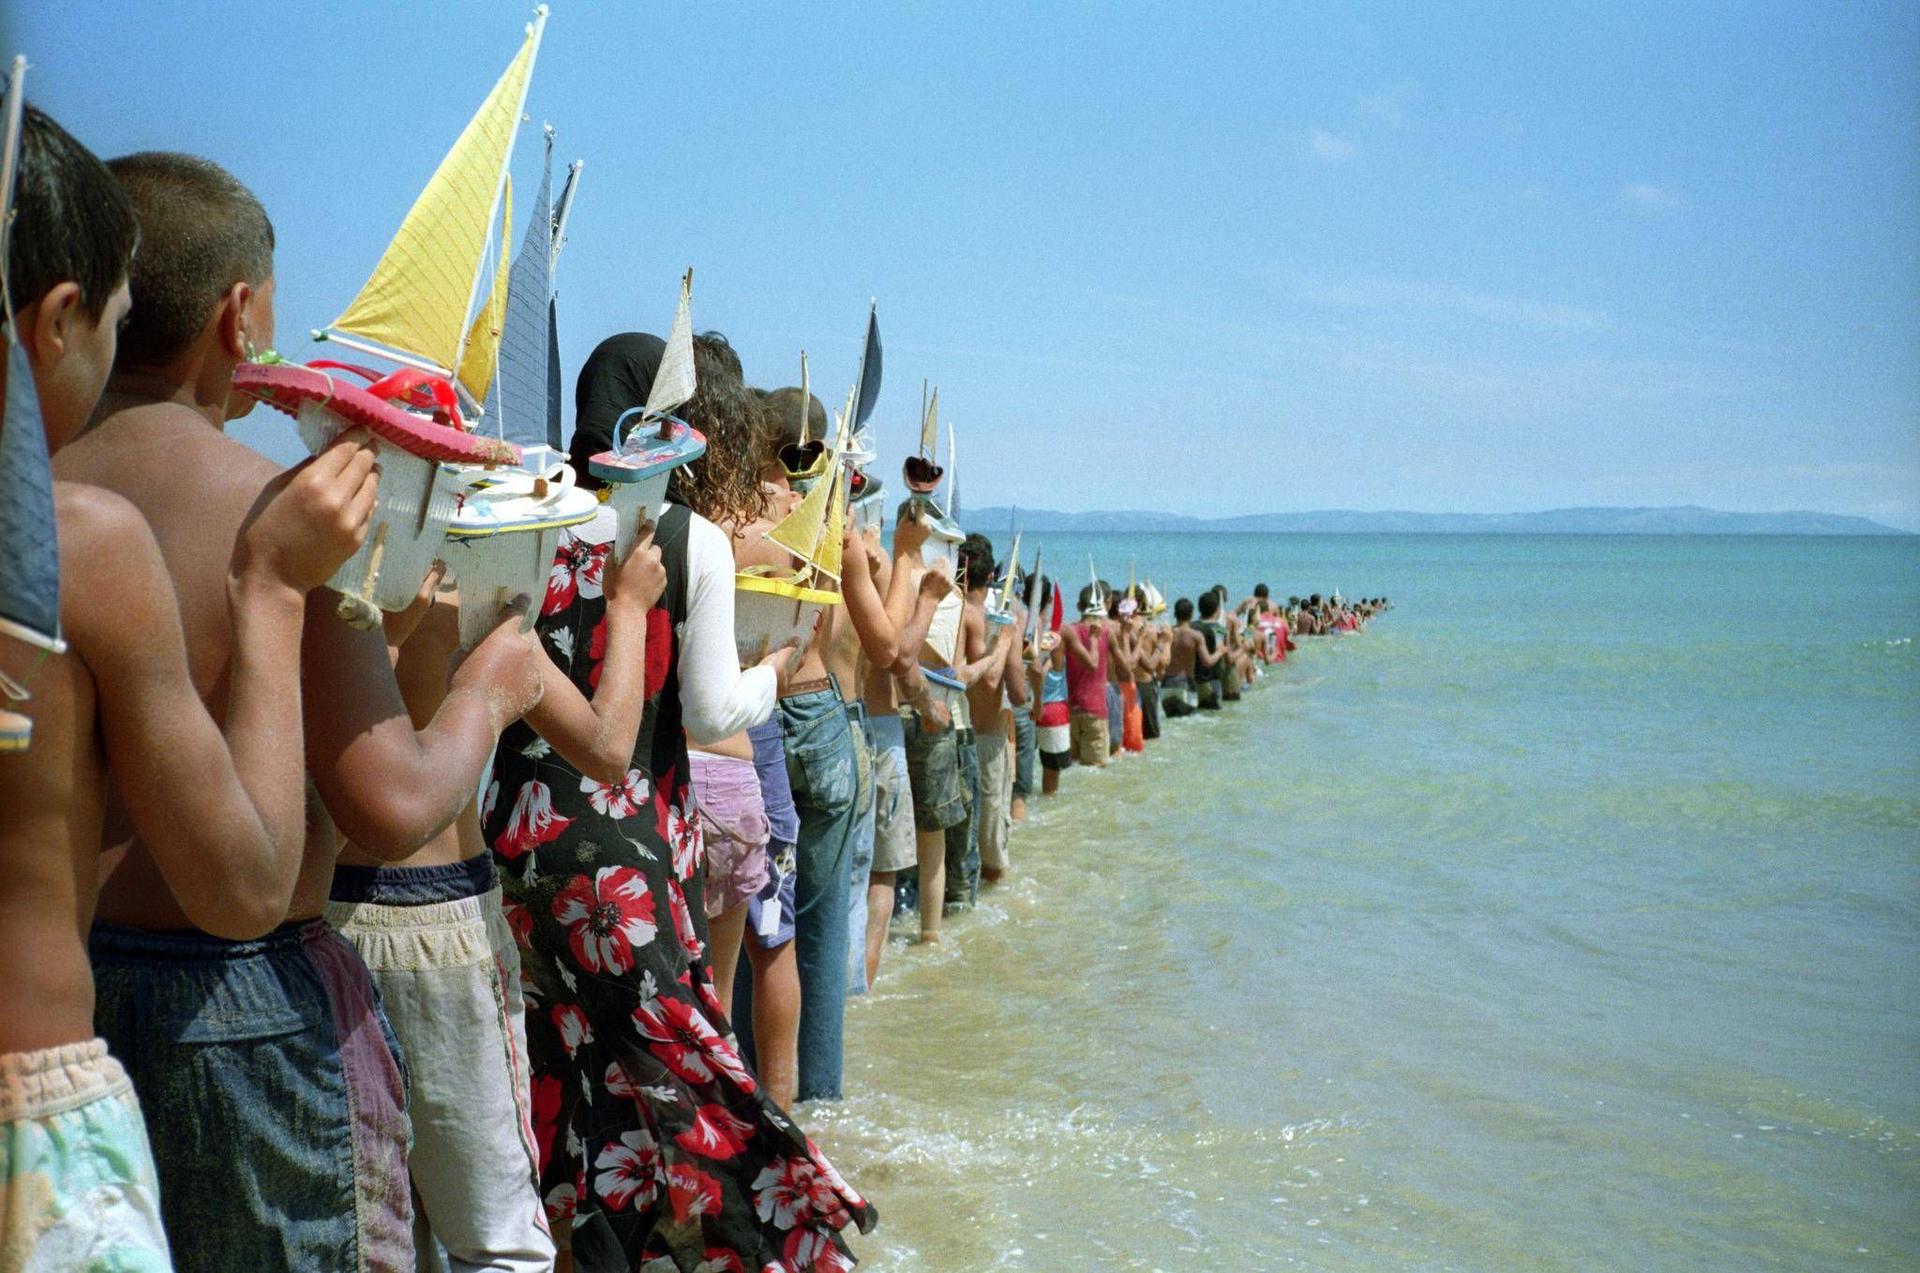 A line of people holding toy boats is seen going into the ocean.